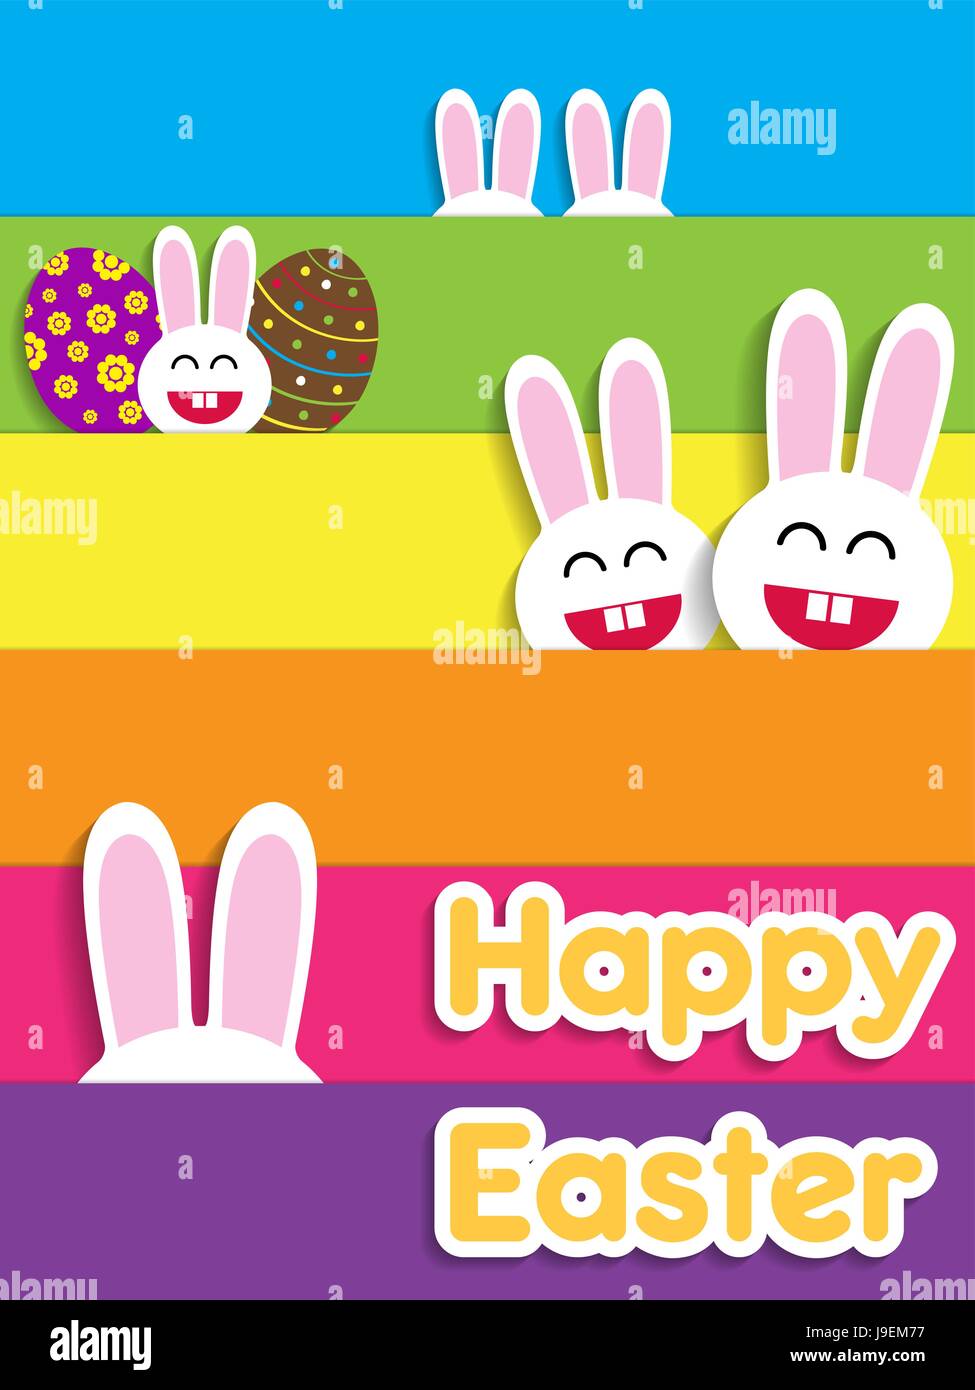 Funny Happy Easter card with bunnies. Vector illustration. Stock Vector